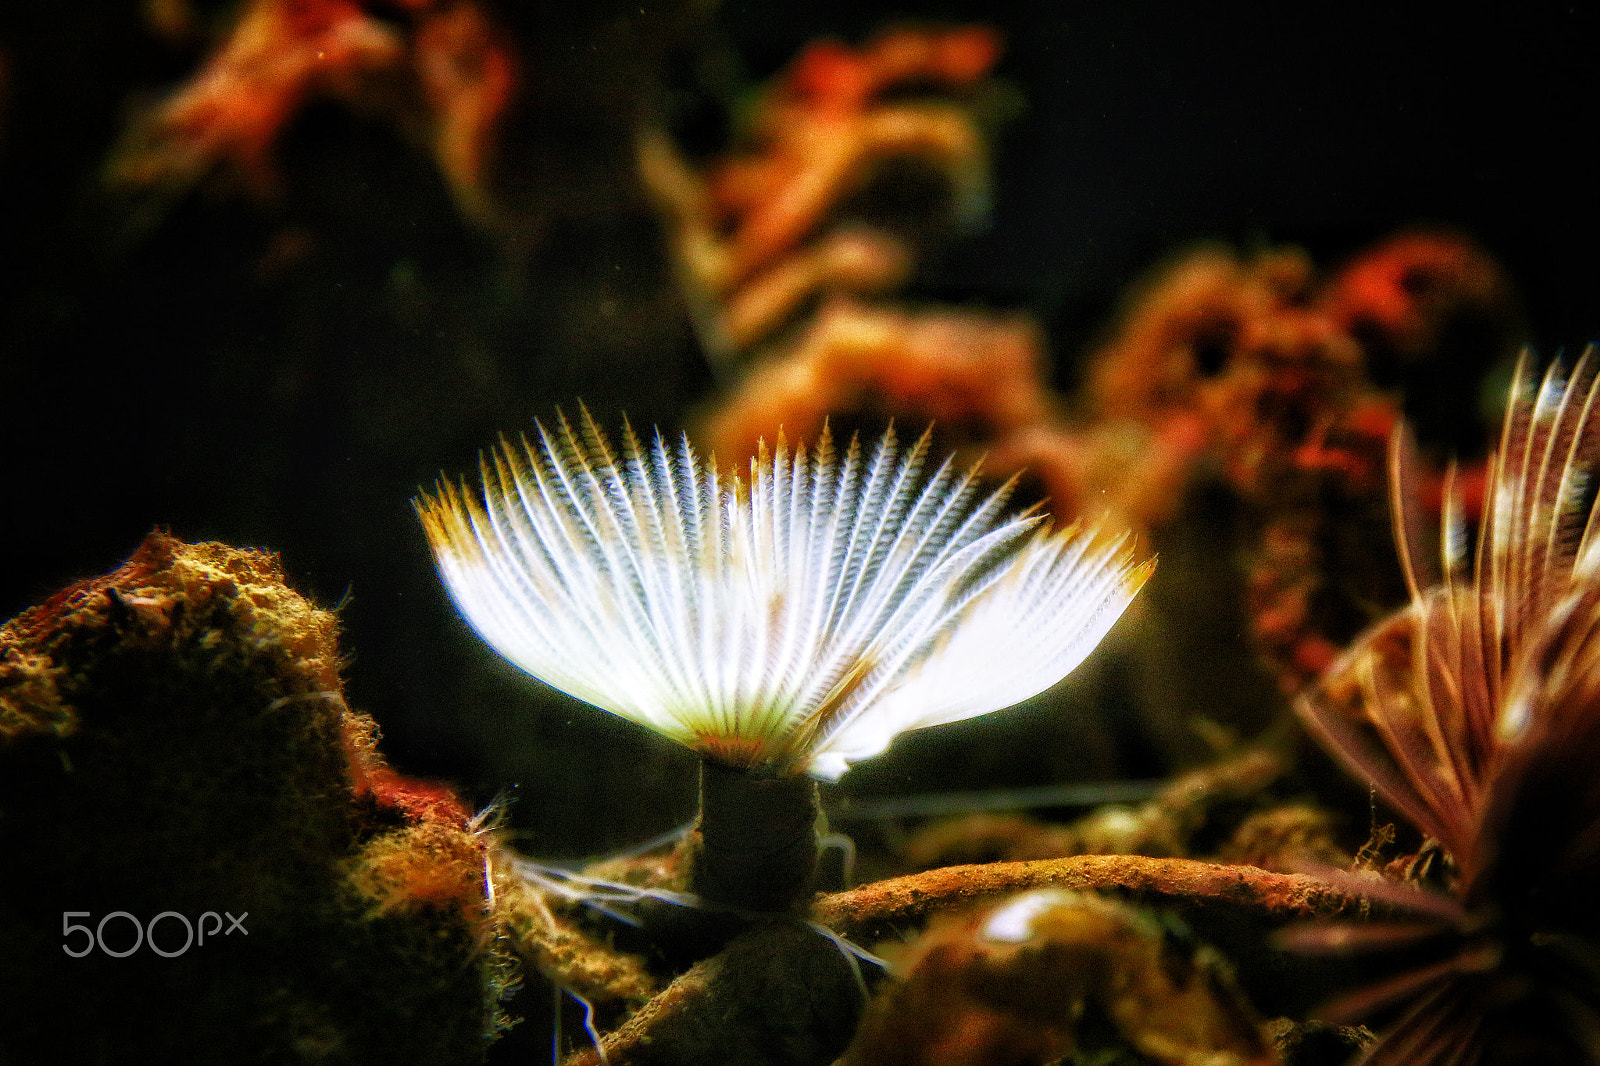 Canon EOS 70D sample photo. This was an interesting looking underwater plant or creature? photography